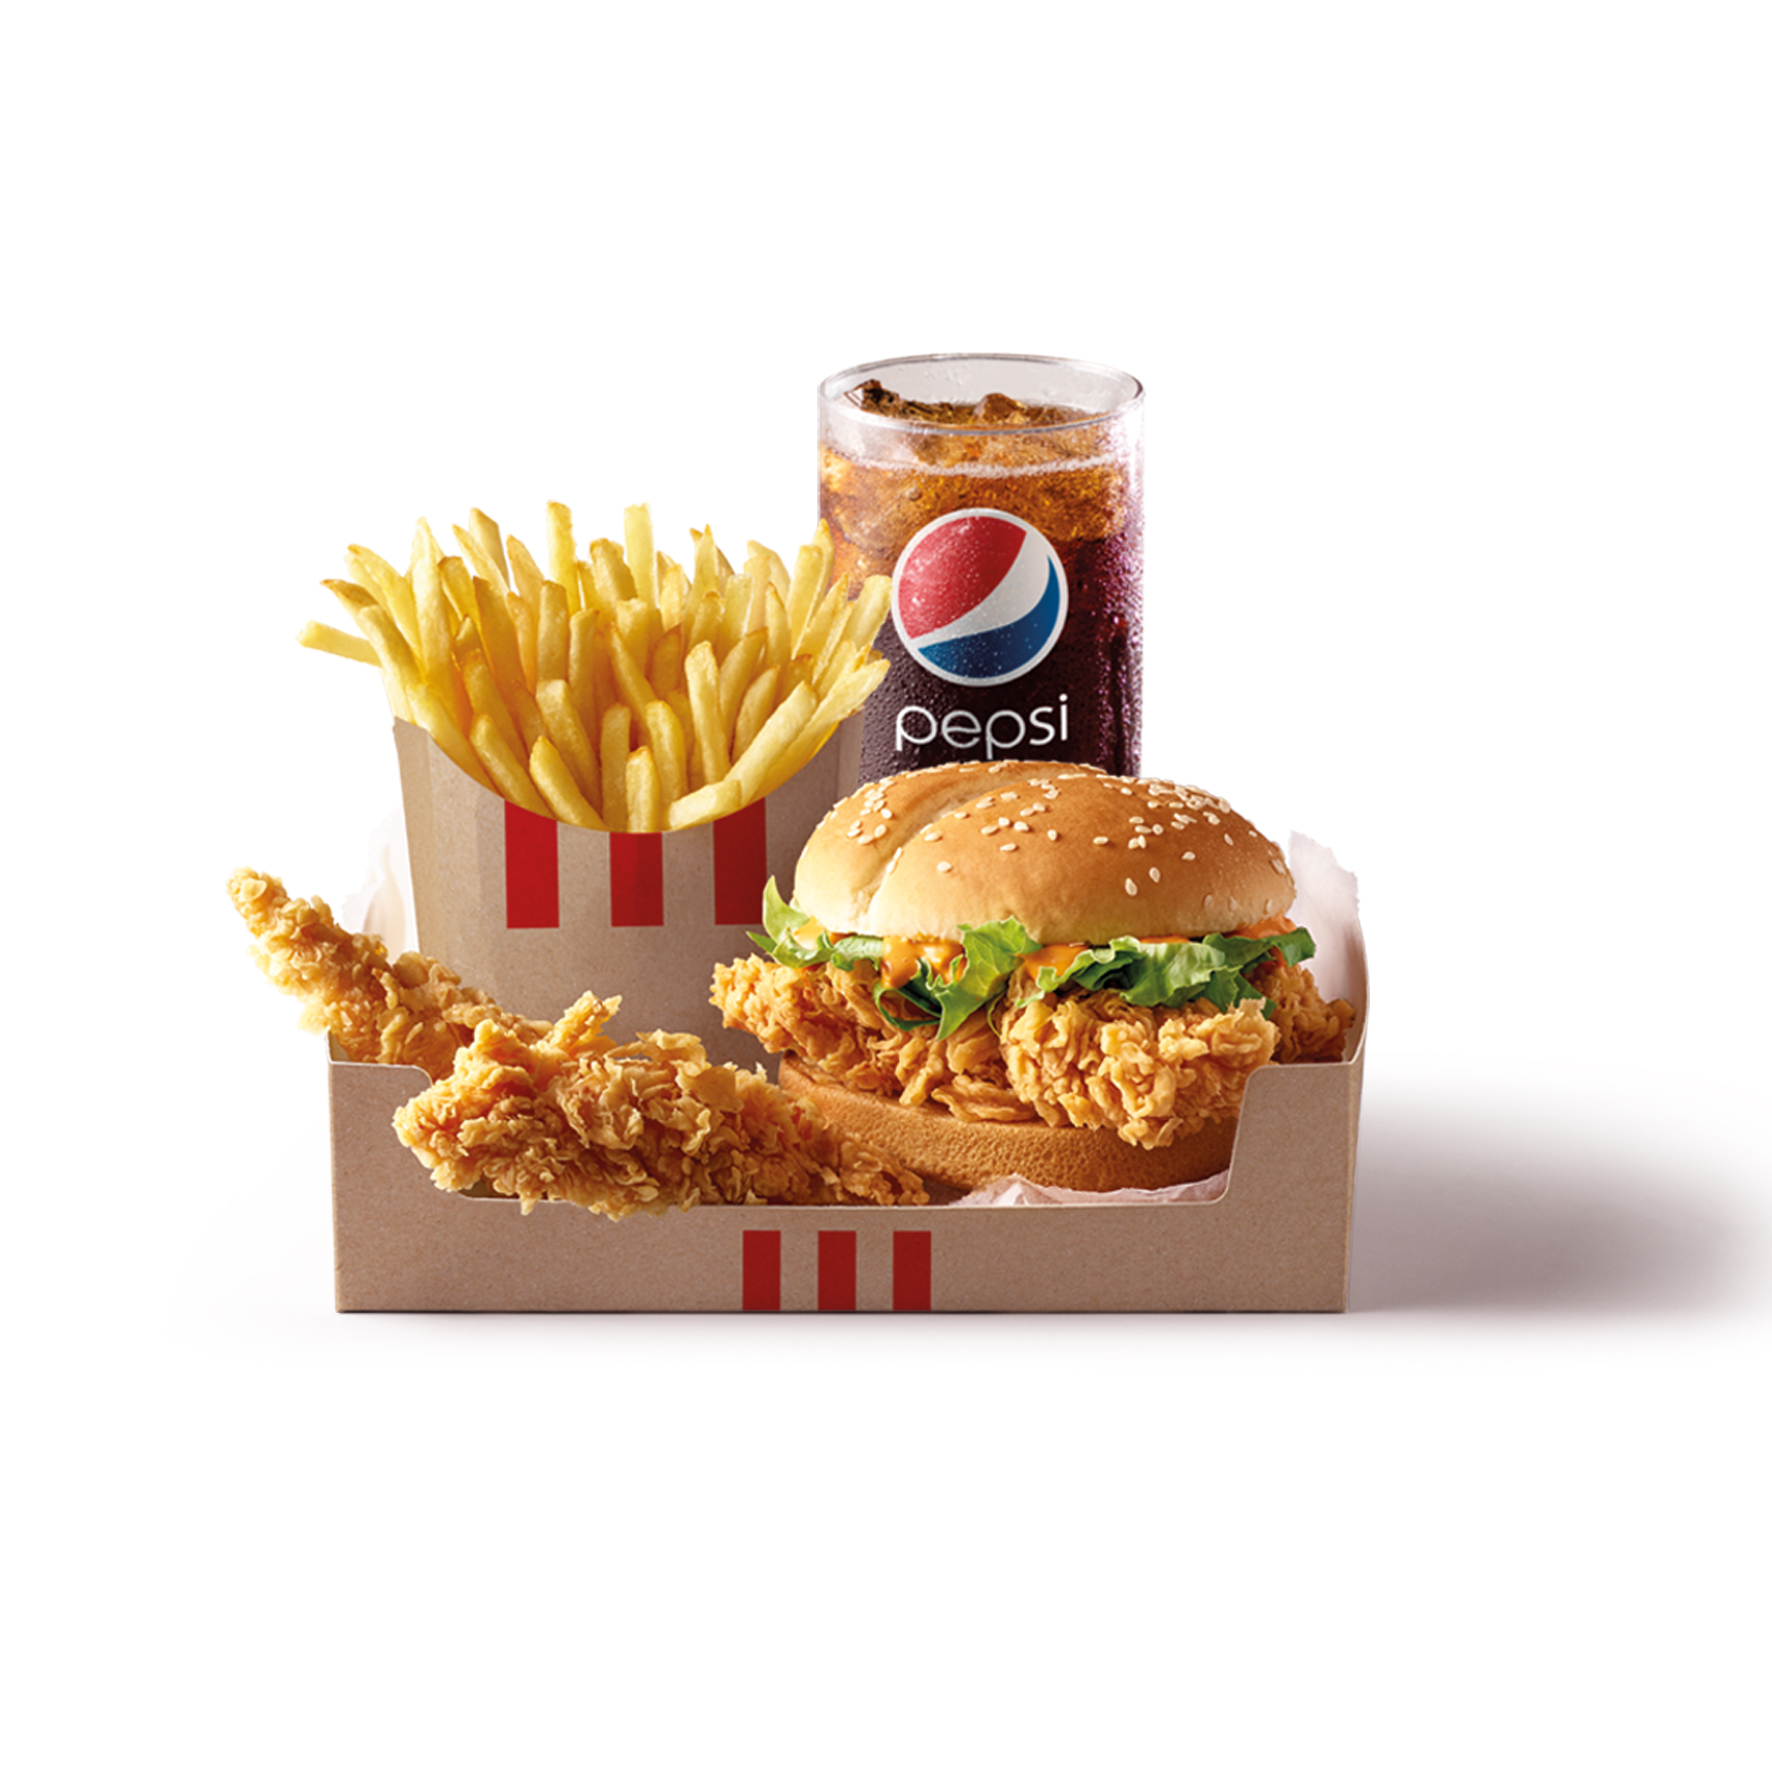 KFC Deals & Offers - Order Online in Beirut, Tripoli and whole Lebanon